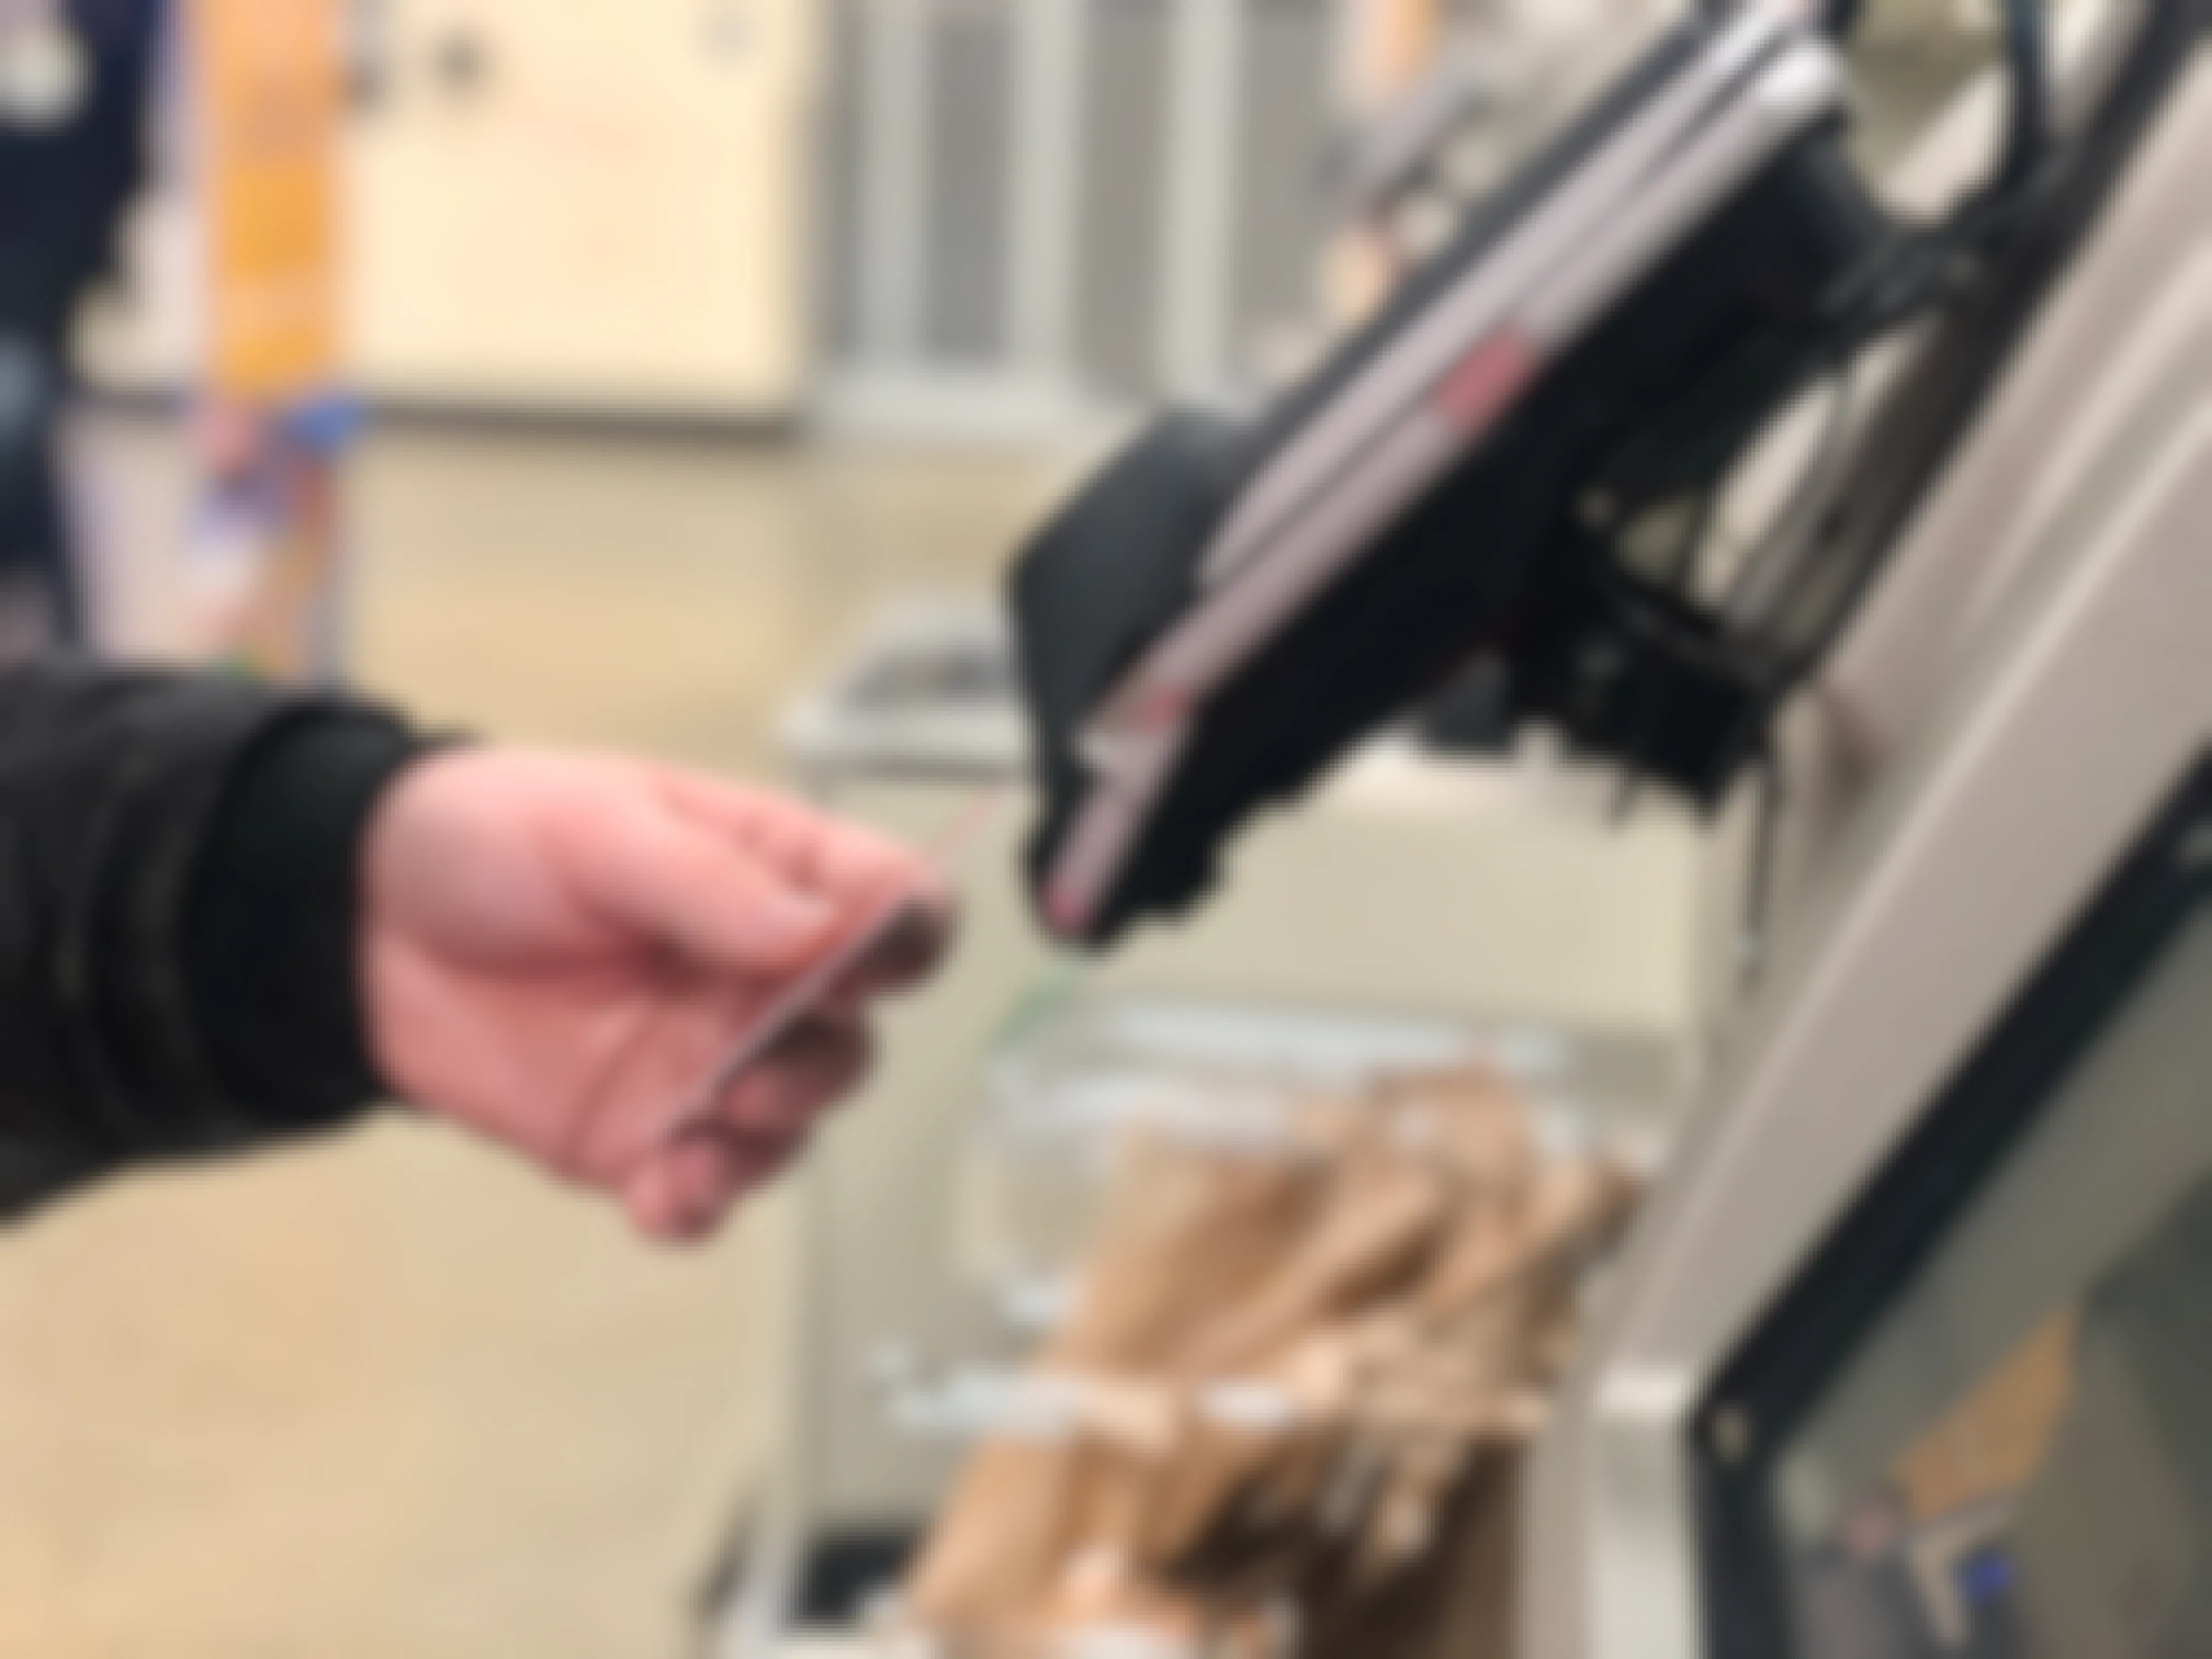 shopper paying at store checkout with credit card